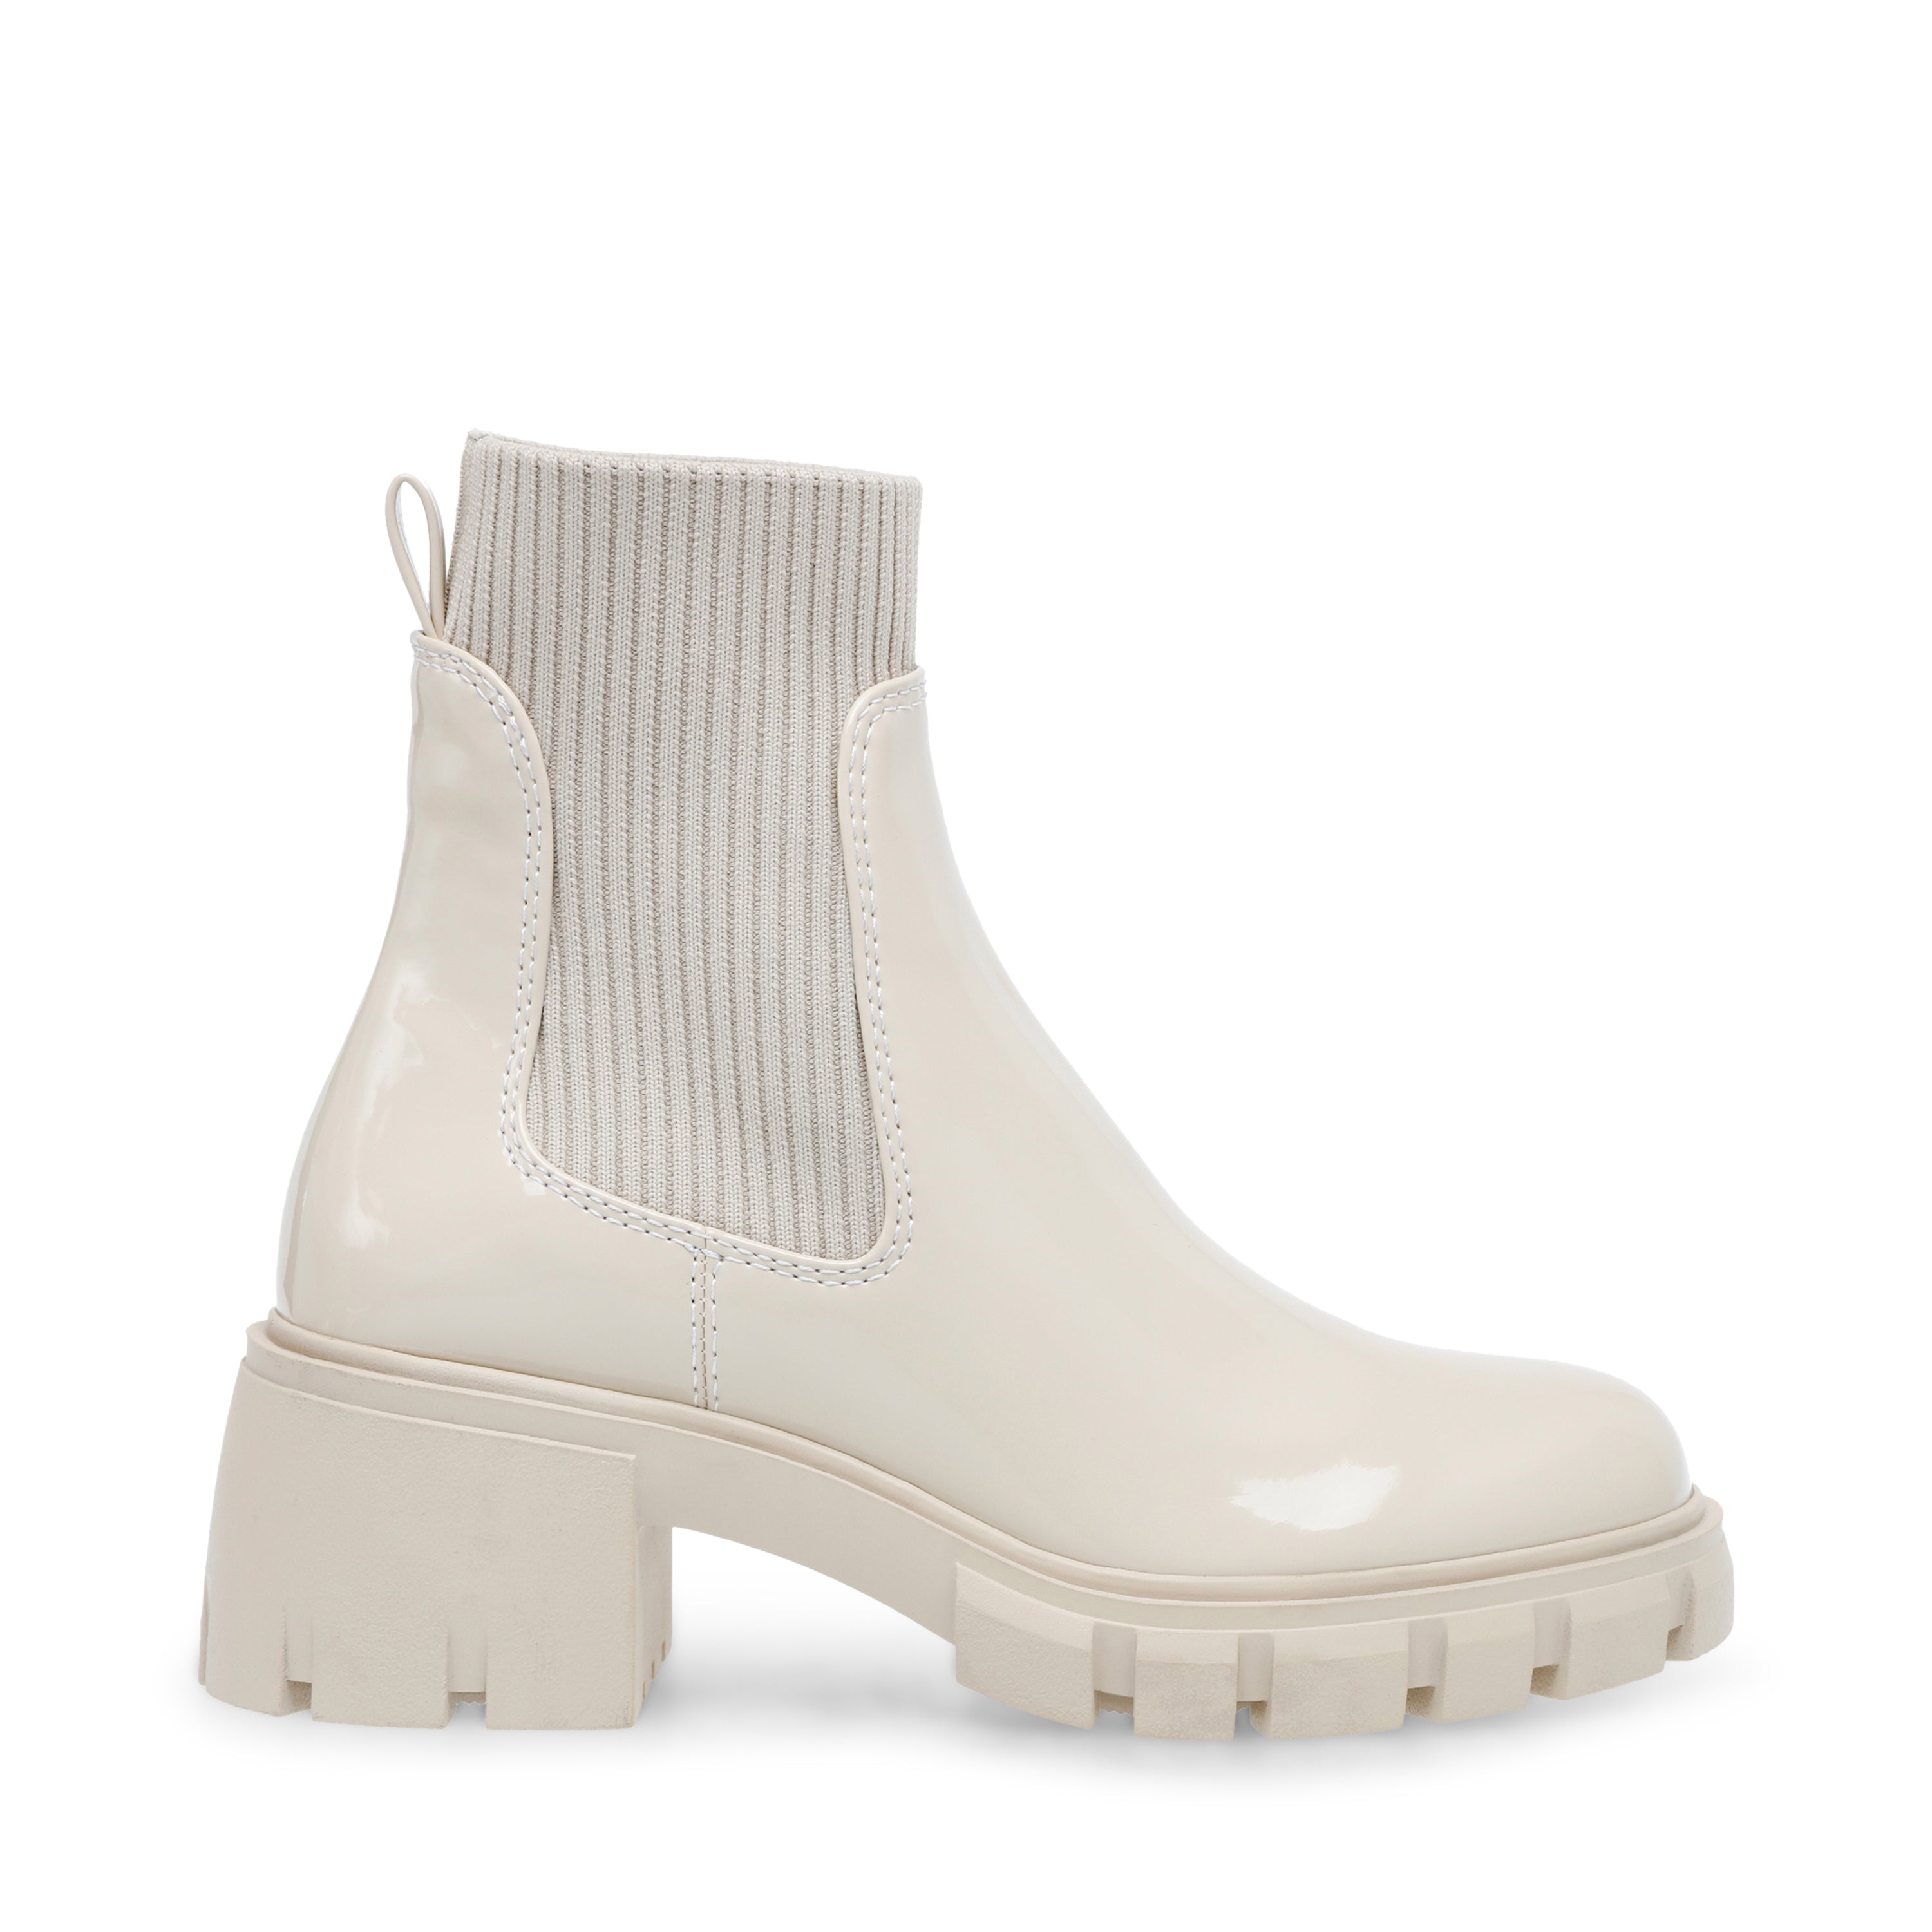 Steve Madden Chelsea boots | and Fast Delivery – Steve Madden UK